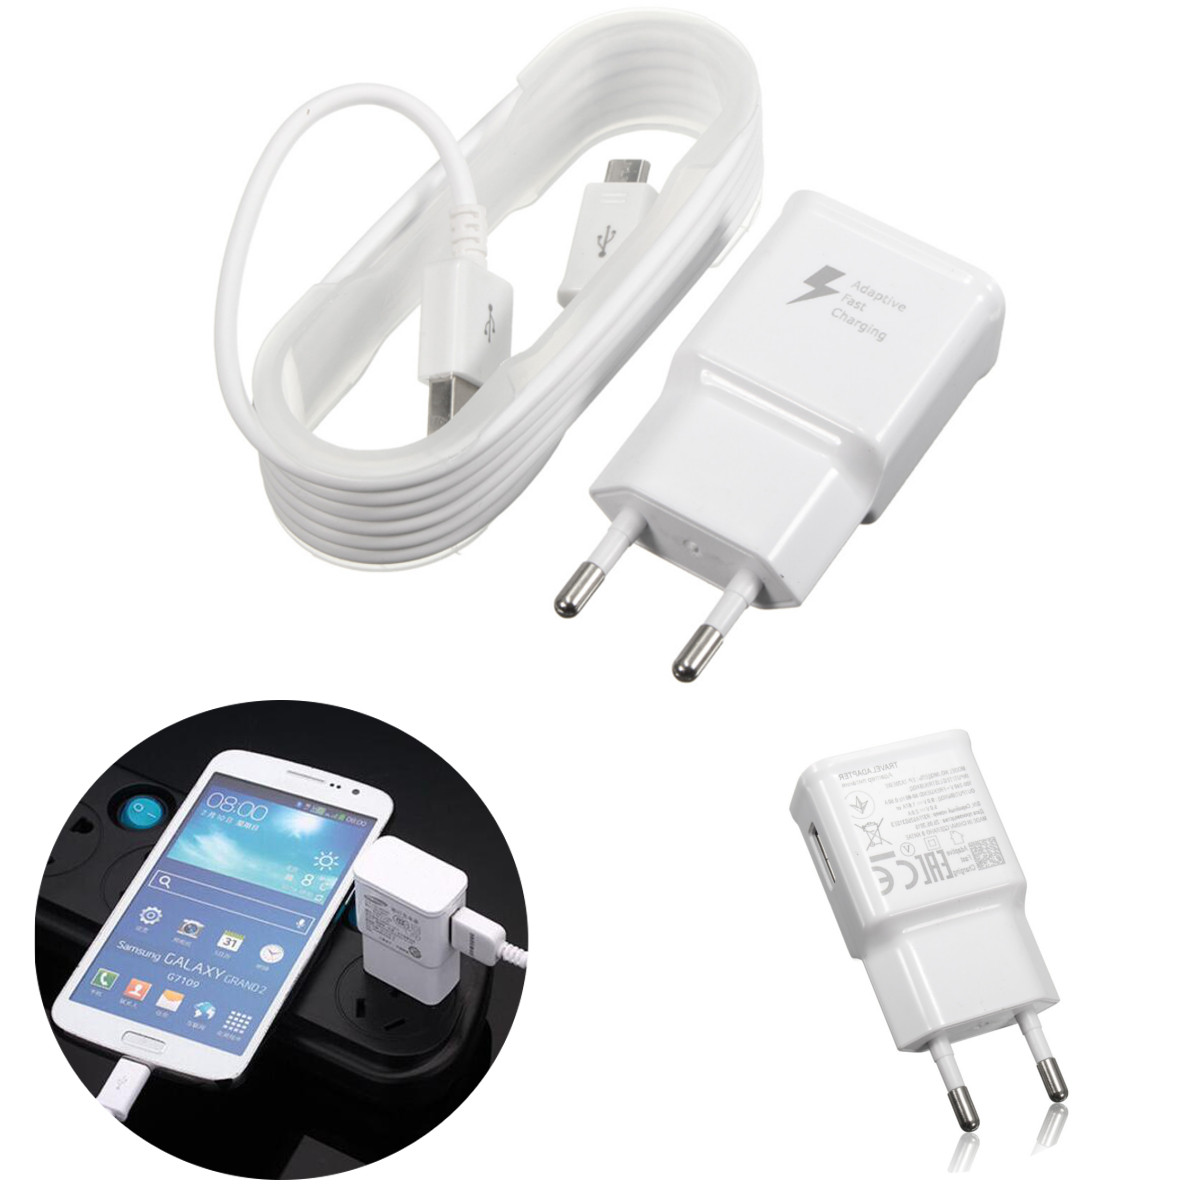 Bakeey-EU-9V-2A-Micro-USB-Charger-Charging-Cable-Adapter-For-Samsung-Xiaomi-Huawei-1111445